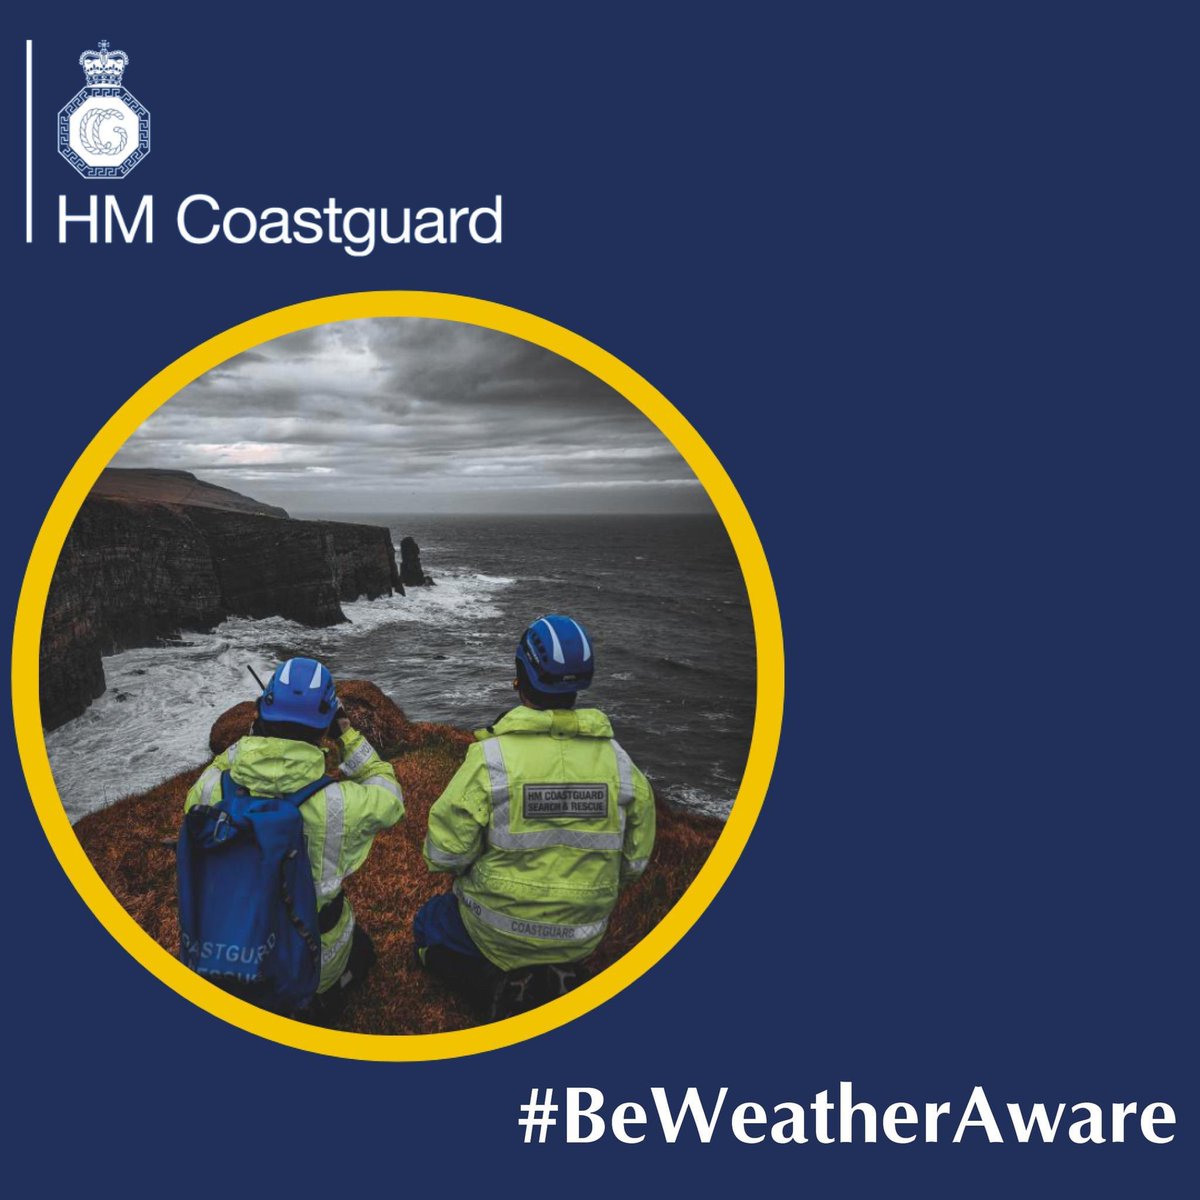 As Storm Ciarán approaches are you #WeatherAware?
Here's some links to the latest information.

☎️ In a coastal emergency call 999 and ask for the Coastguard. 

#999Coastguard #StaySafe #BeWeatherAware #StormCiaran